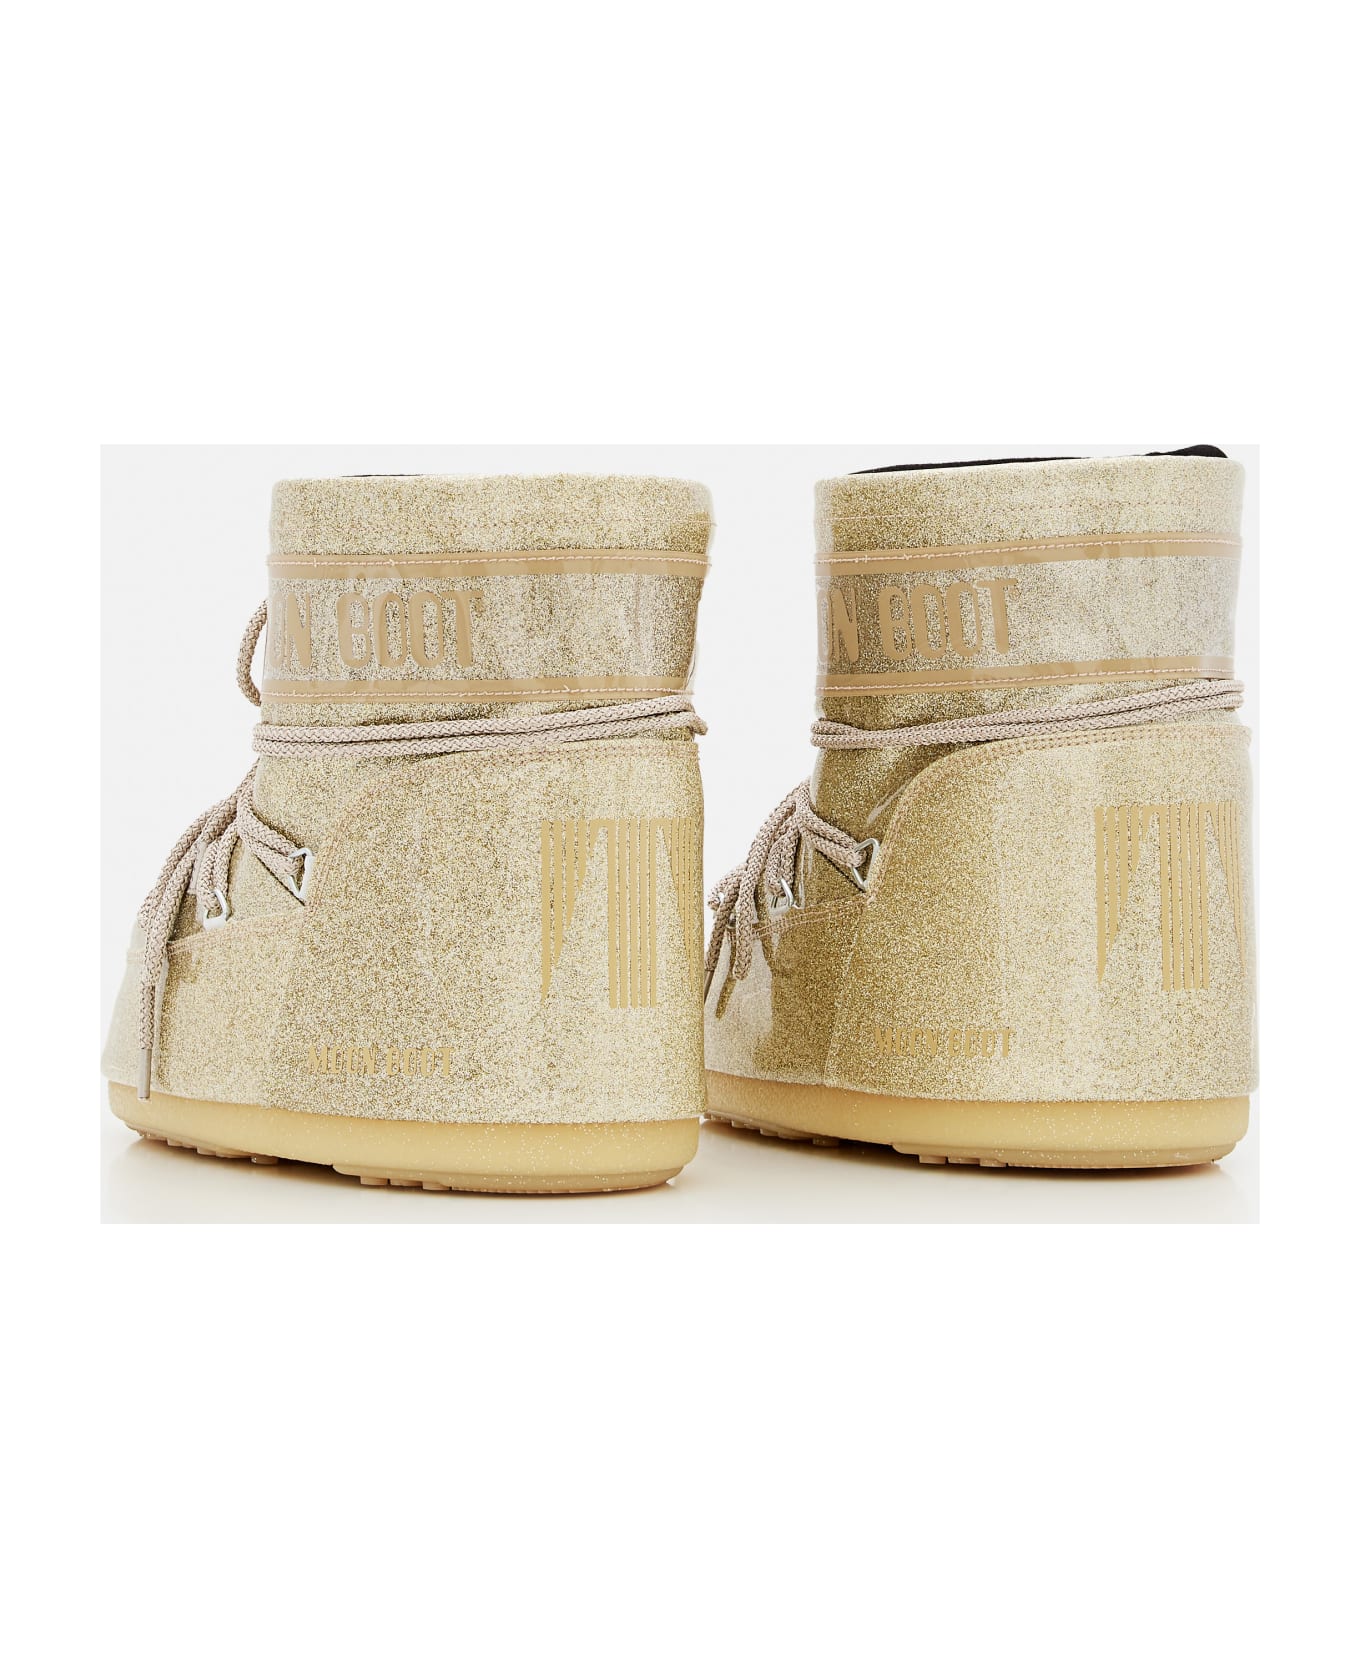 Moon Boot Mb Icon Low Glitter Snow Boots - Golden